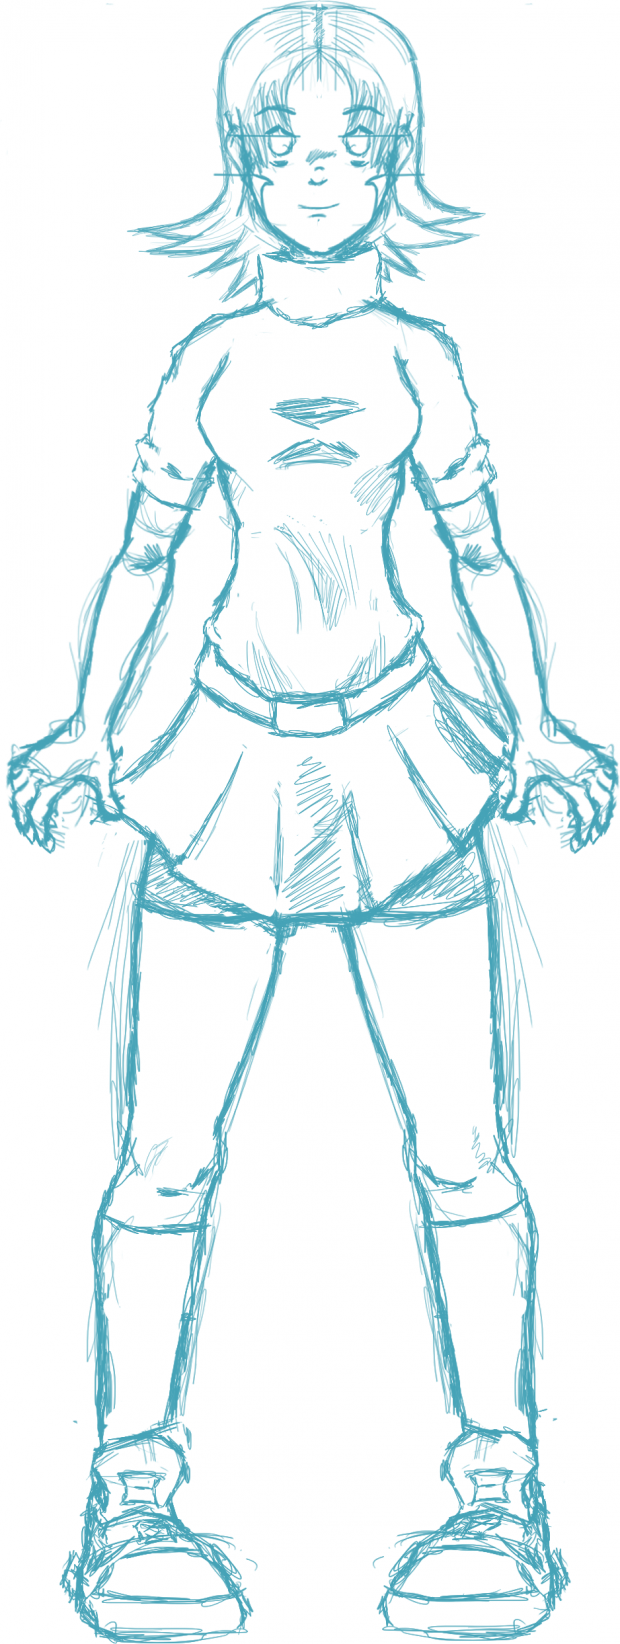 Female Protagonist - Front View (sketch)